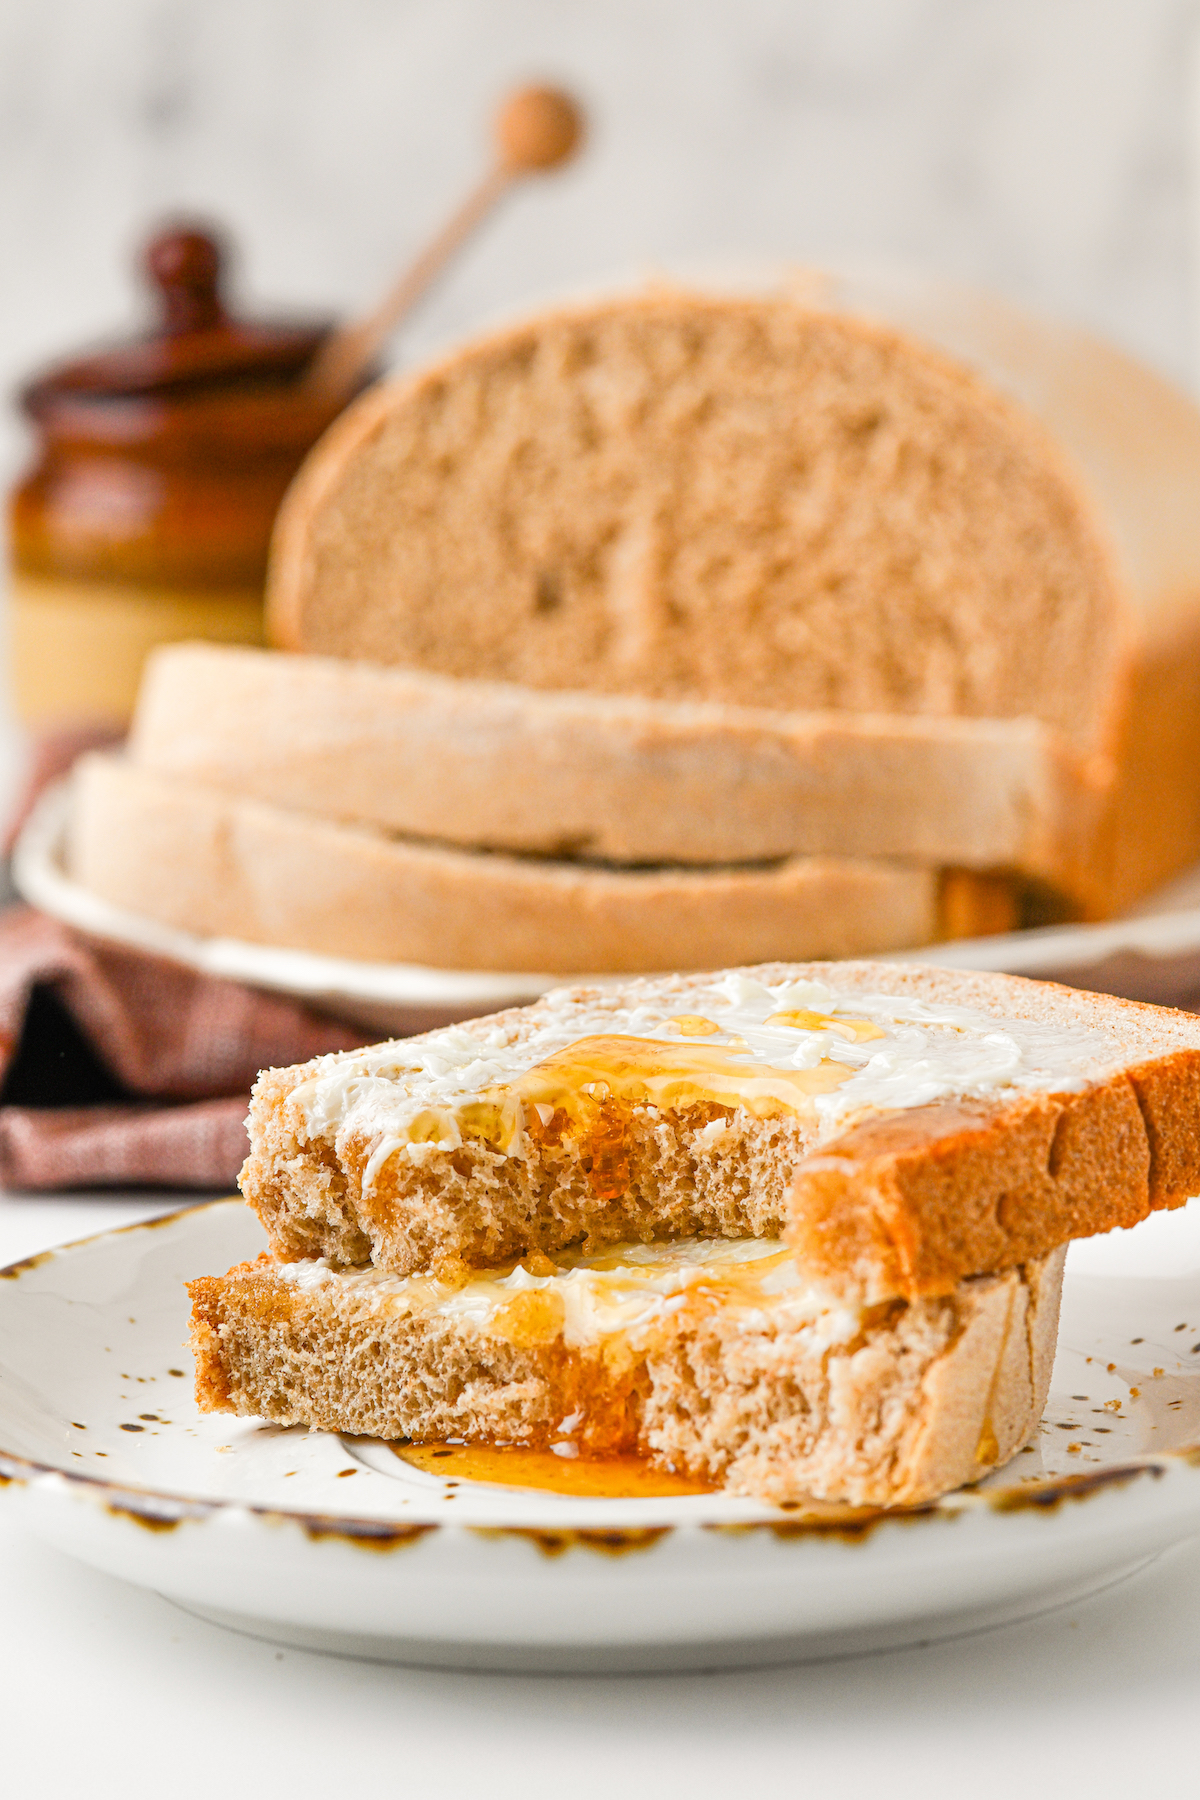 A slice of buttered bread with honey, broken in half, with a bite taken out of one of the halves.